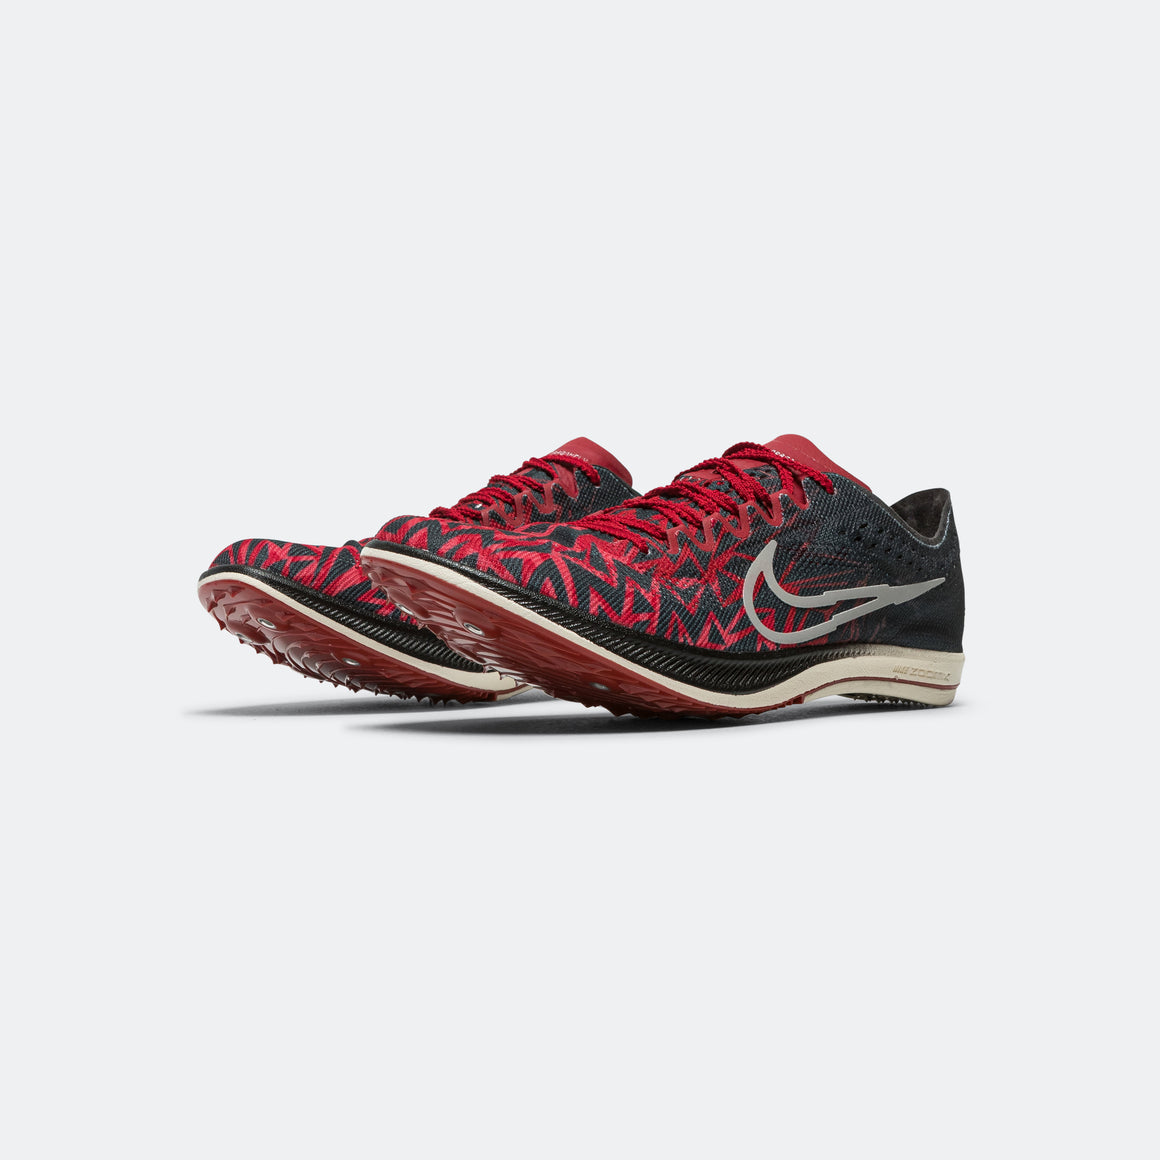 Nike - Mens ZoomX Dragonfly - Bowerman Track Club - Up There Athletics